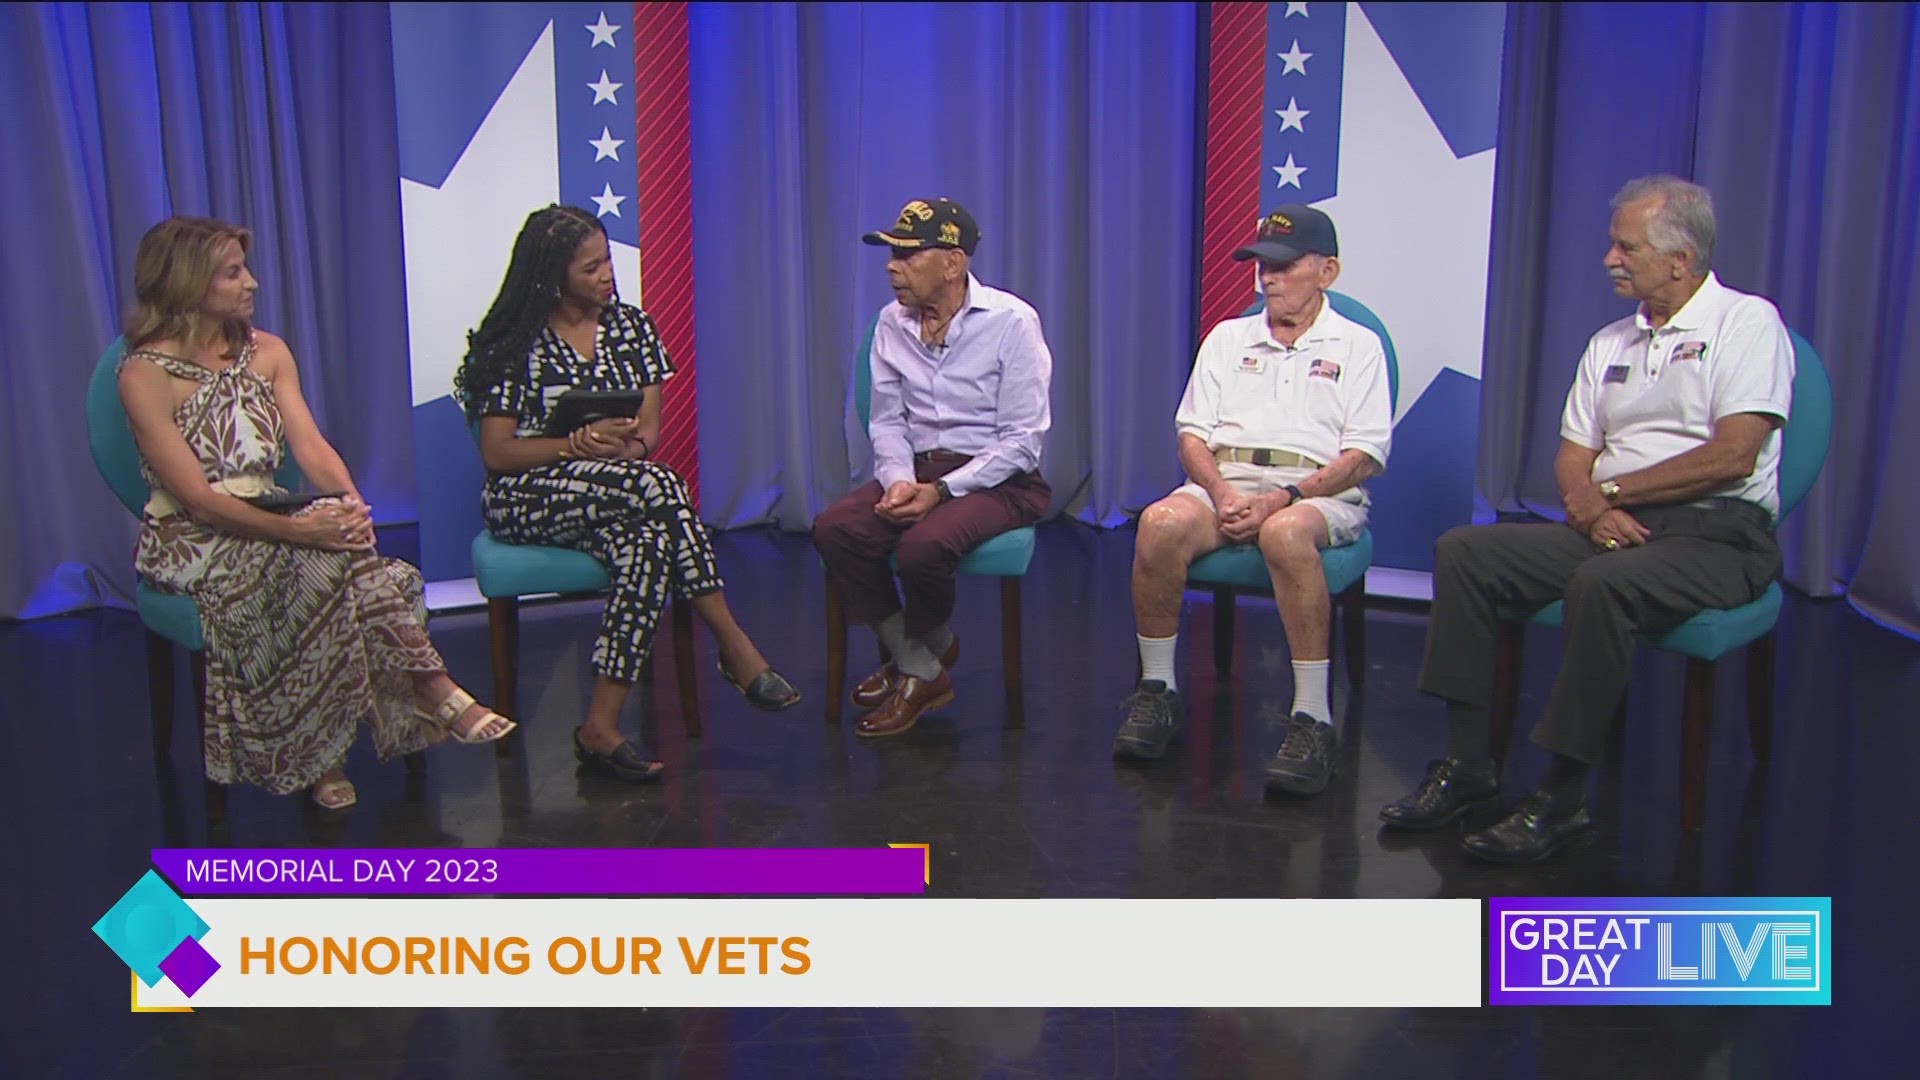 Two WWII vets shared their stories on GDL, as well as talked about their recent Honor Flights.